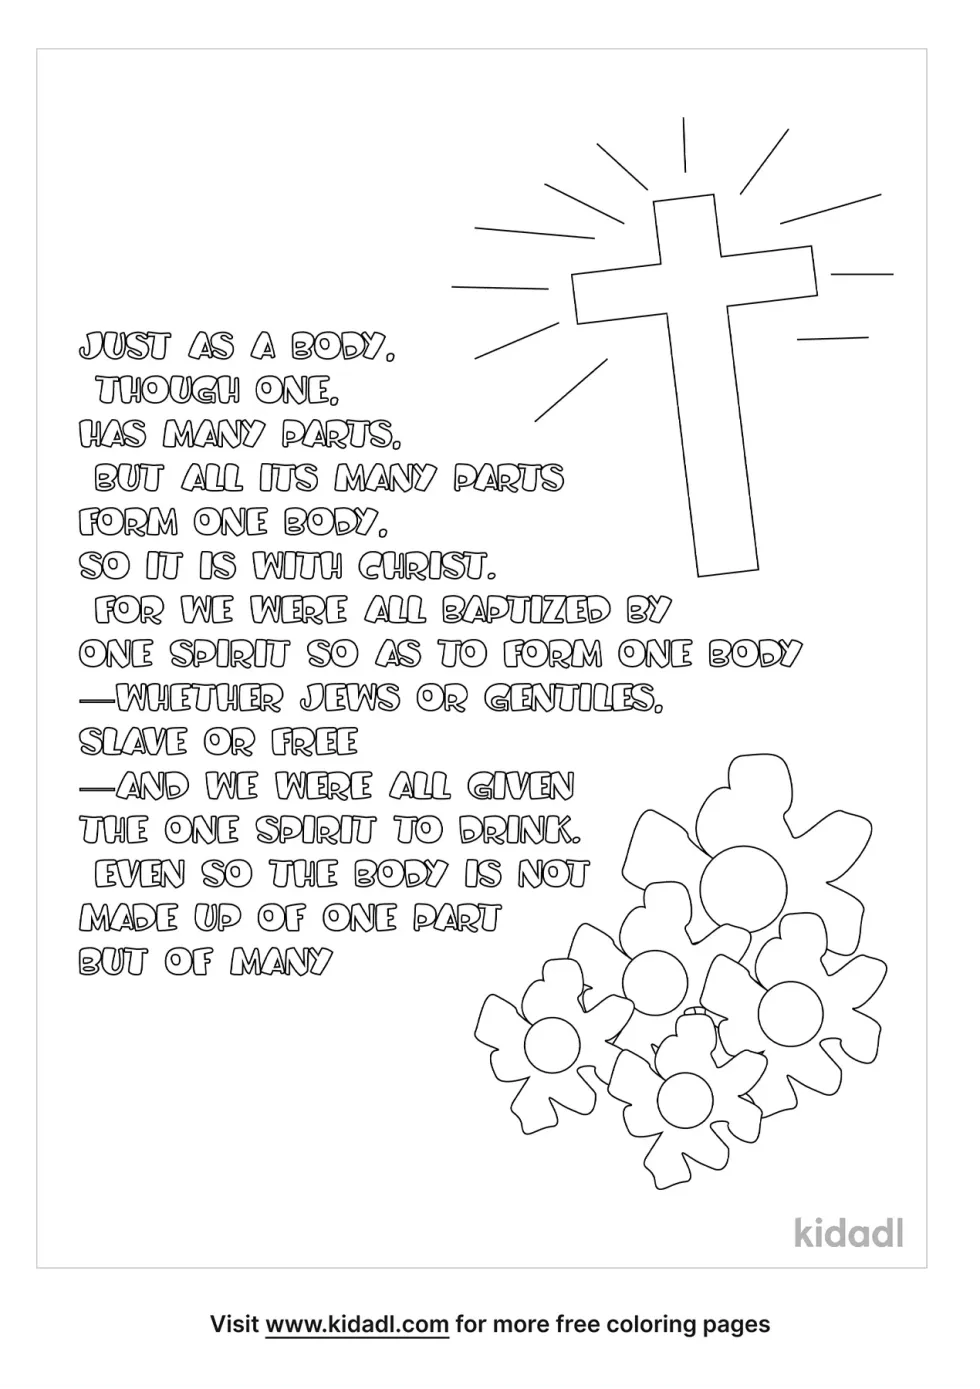 A coloring page showing the text in 1 Corinthians 12:12-14, with a cross and flowers at its edges